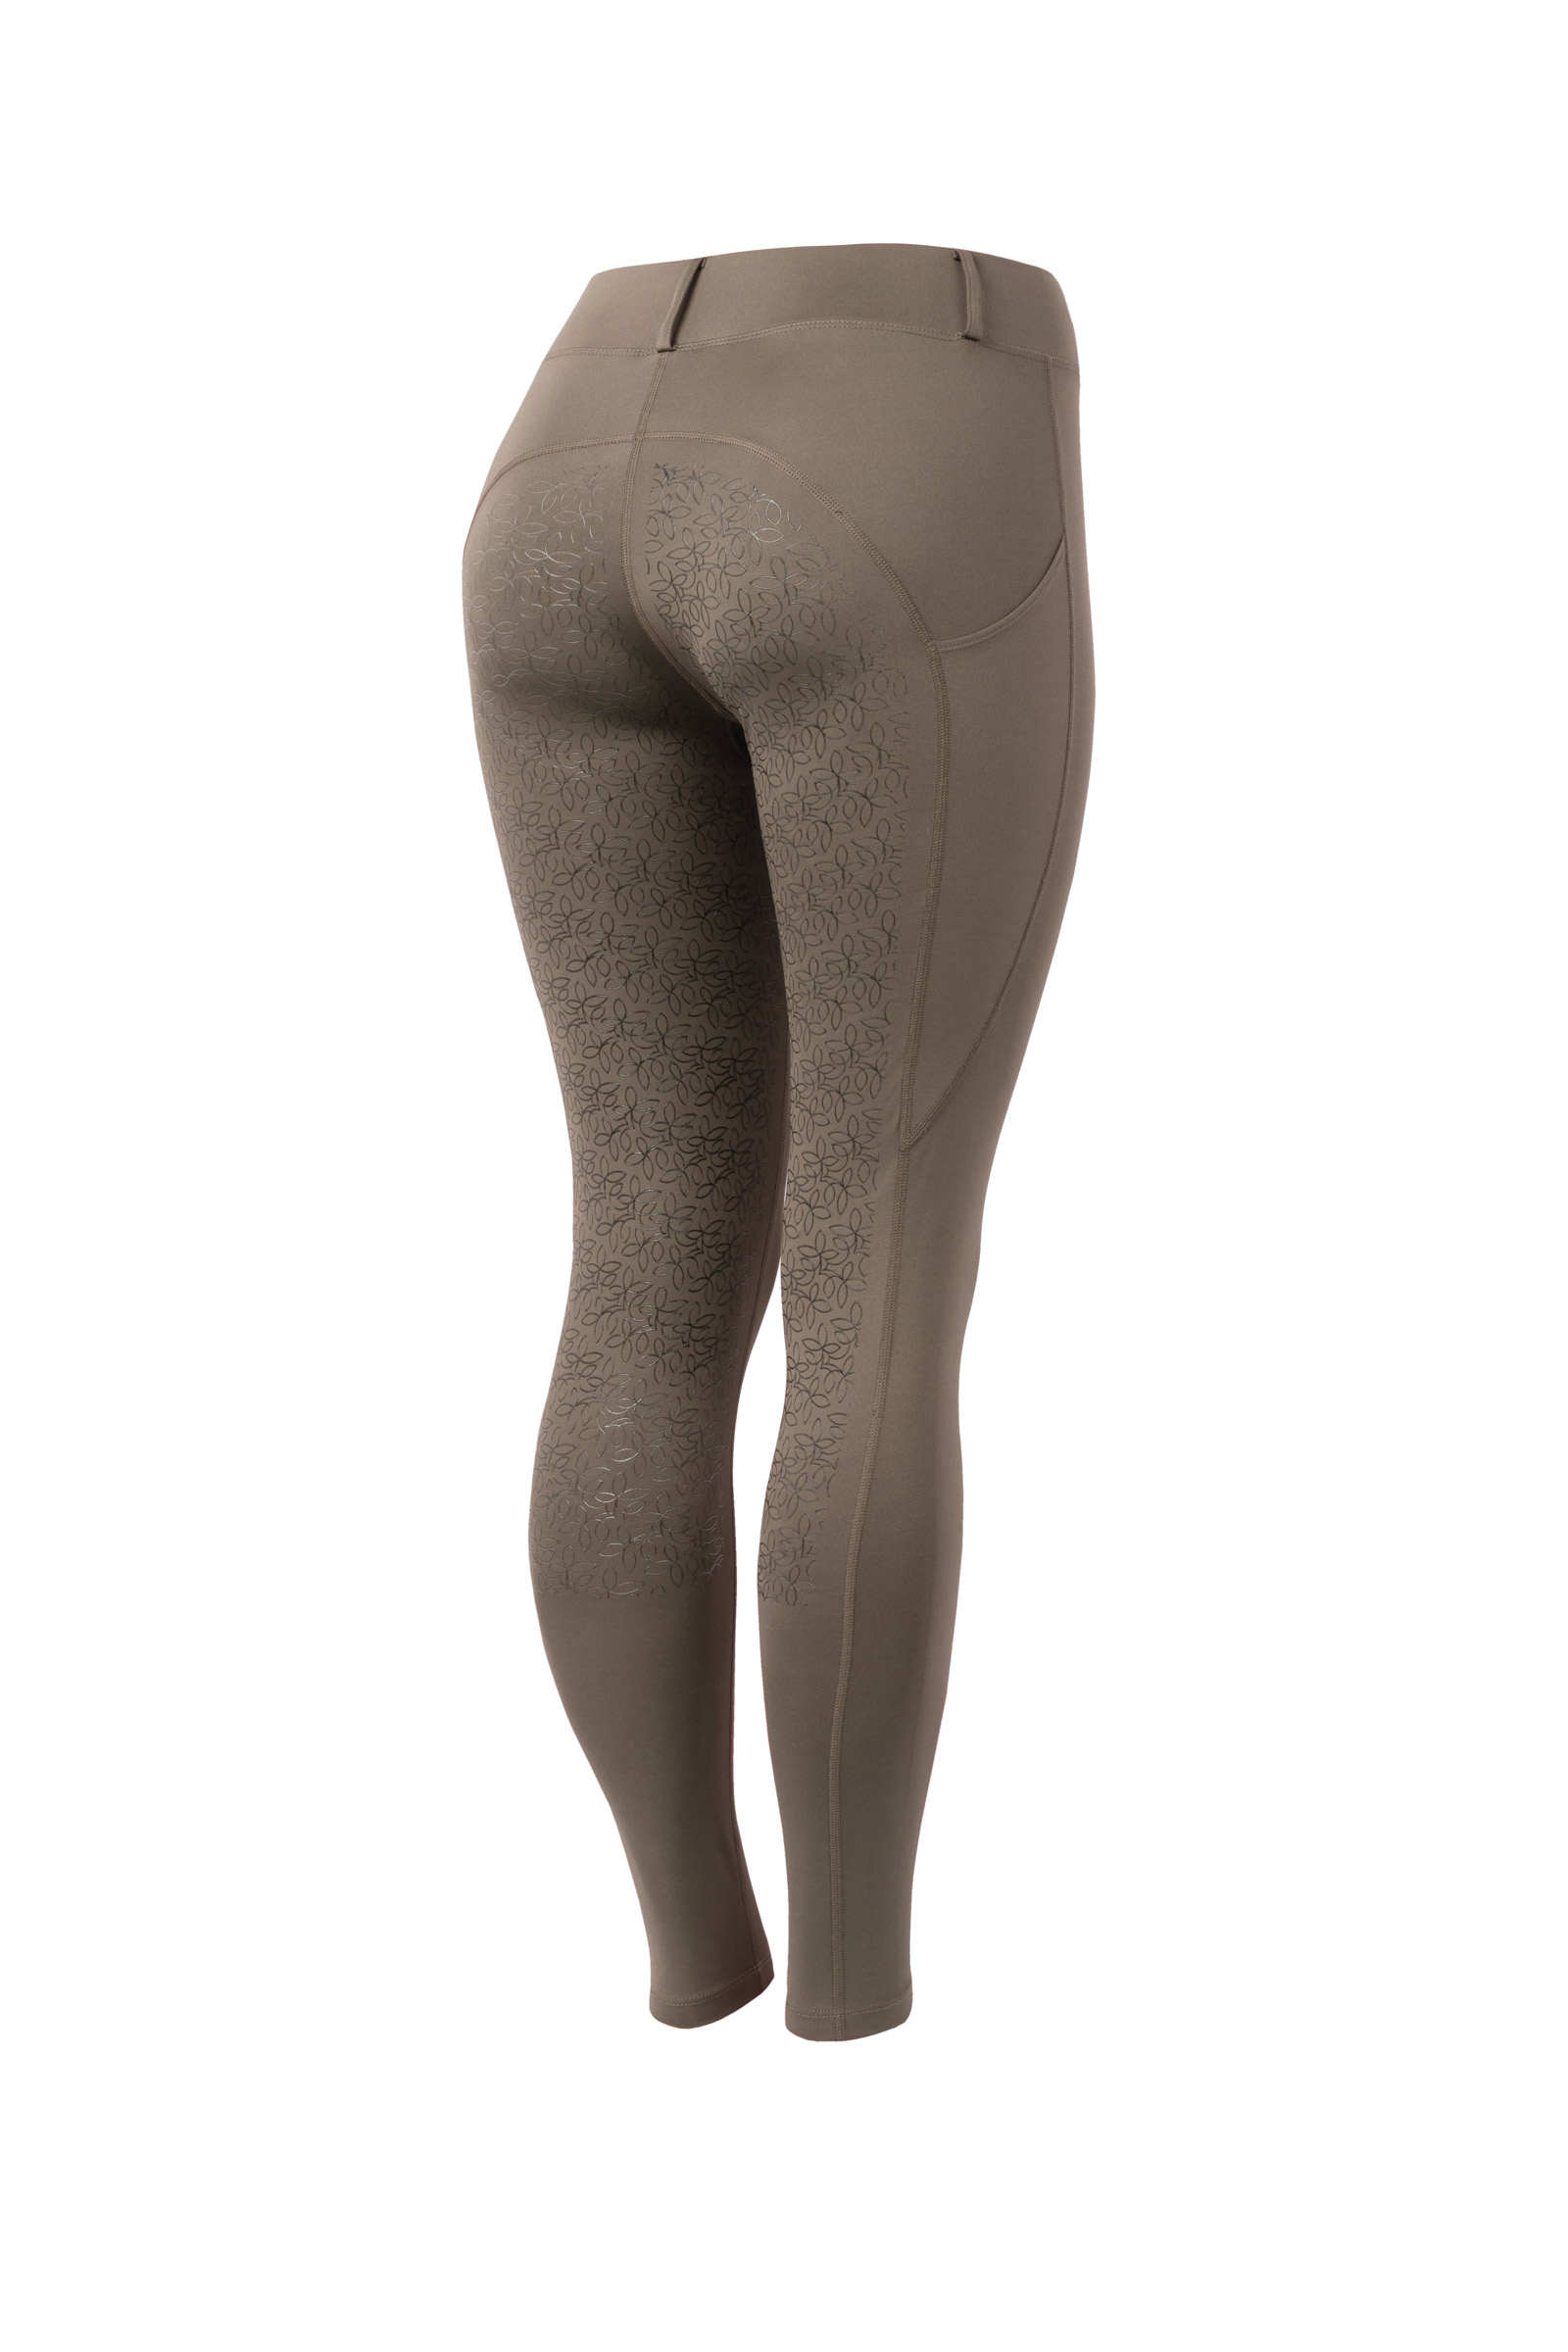 Buy Thermal Riding Tights Online - DUBLIN